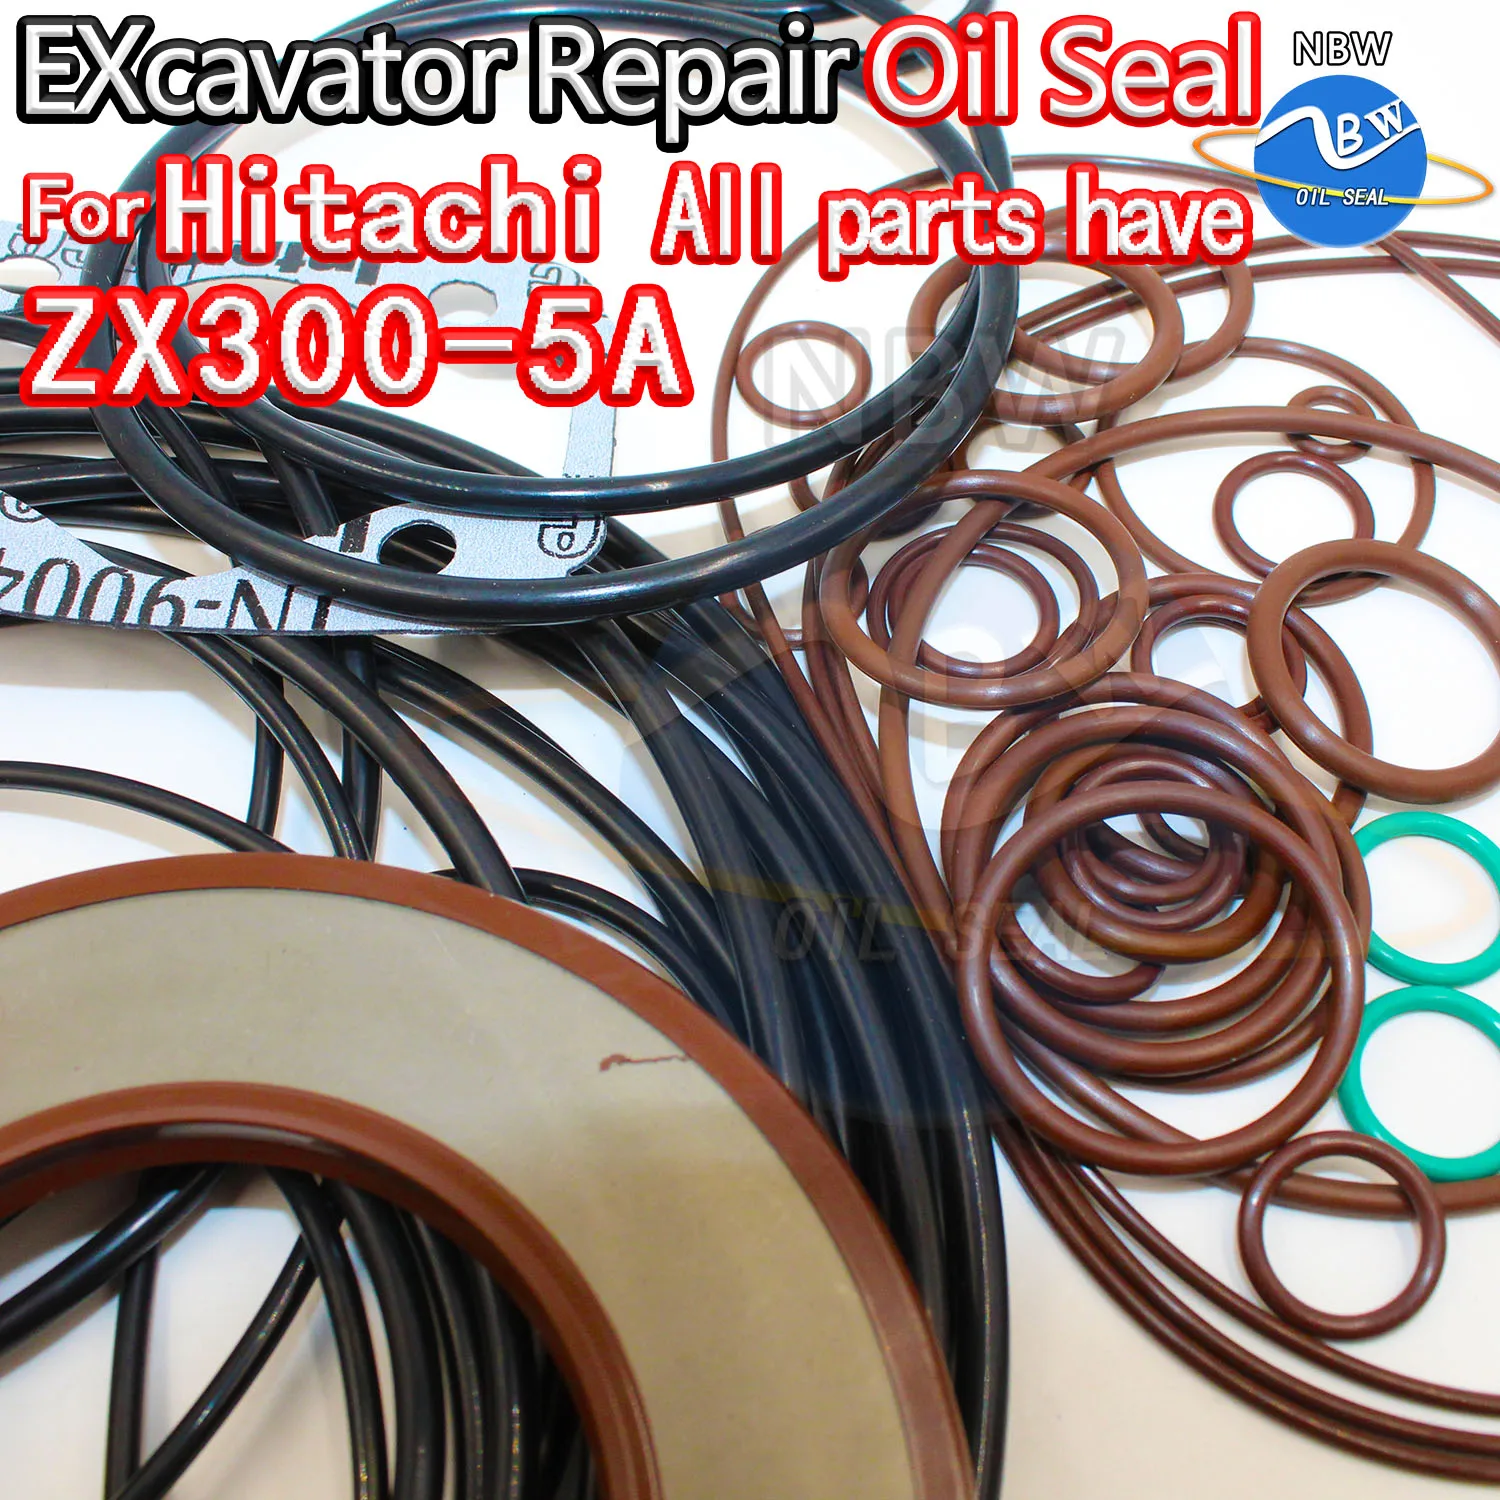 

For HITACHI ZX300-5A Excavator Oil Seal Kit High Quality Repair ZX300 5A ARM Bucket Hydraulic Pump Digger Clamshell Shovel Swing